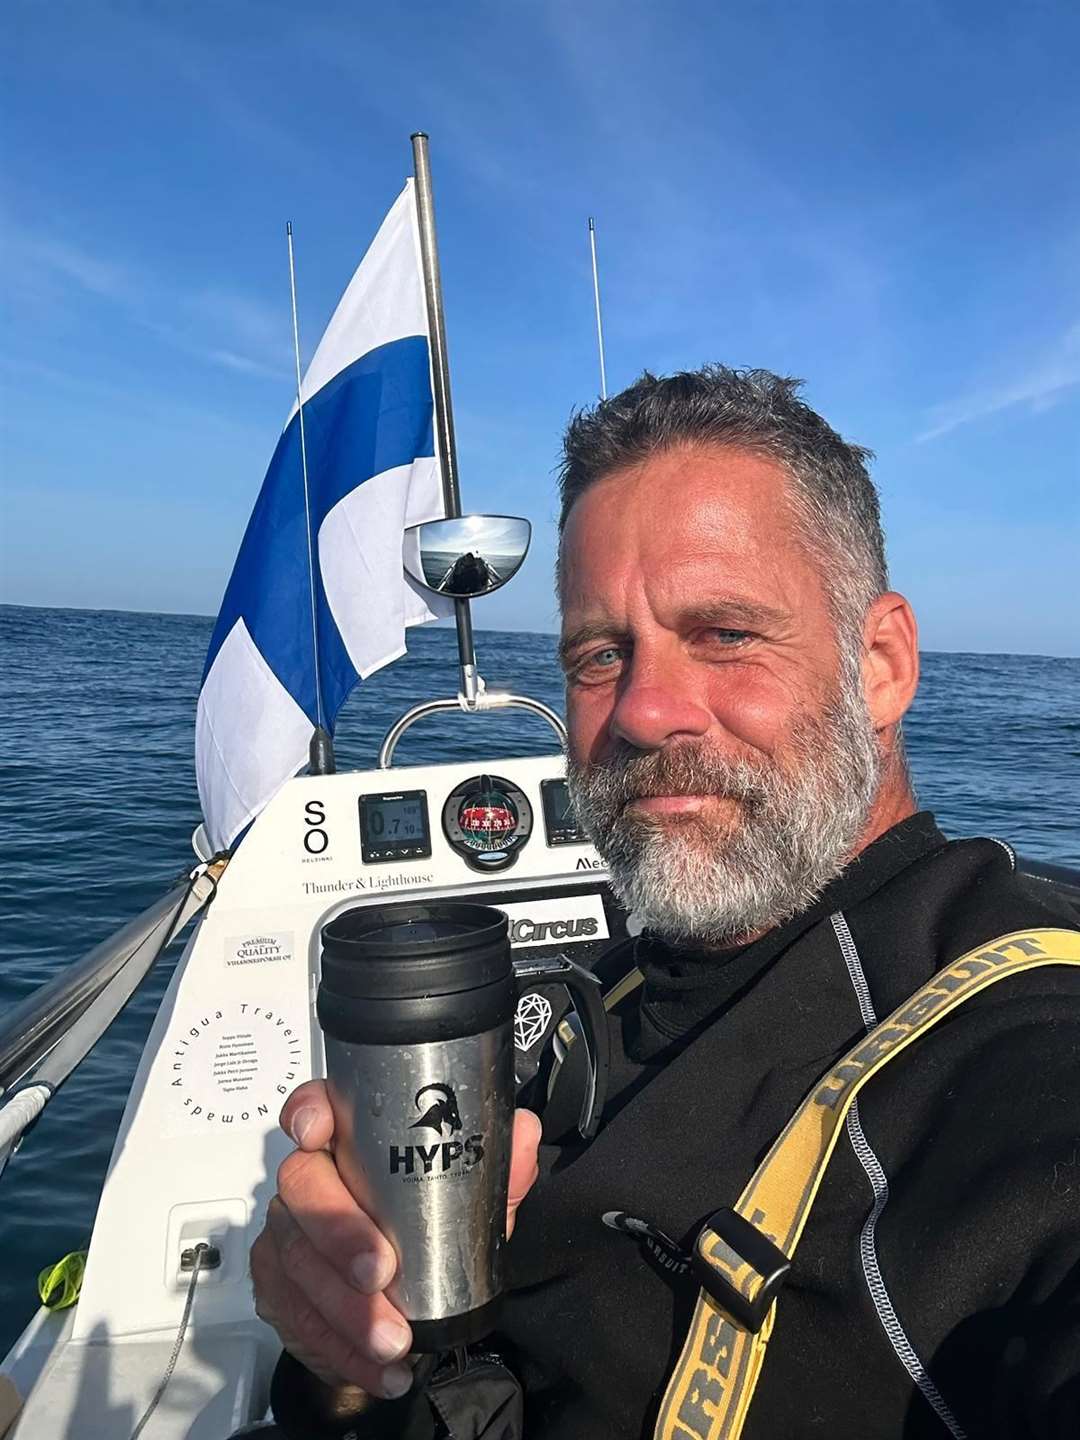 Jari Saario (51) is crossing the Caledonian Canal on his way to Finland after solo rowing for almost 80 days in the Atlantic.